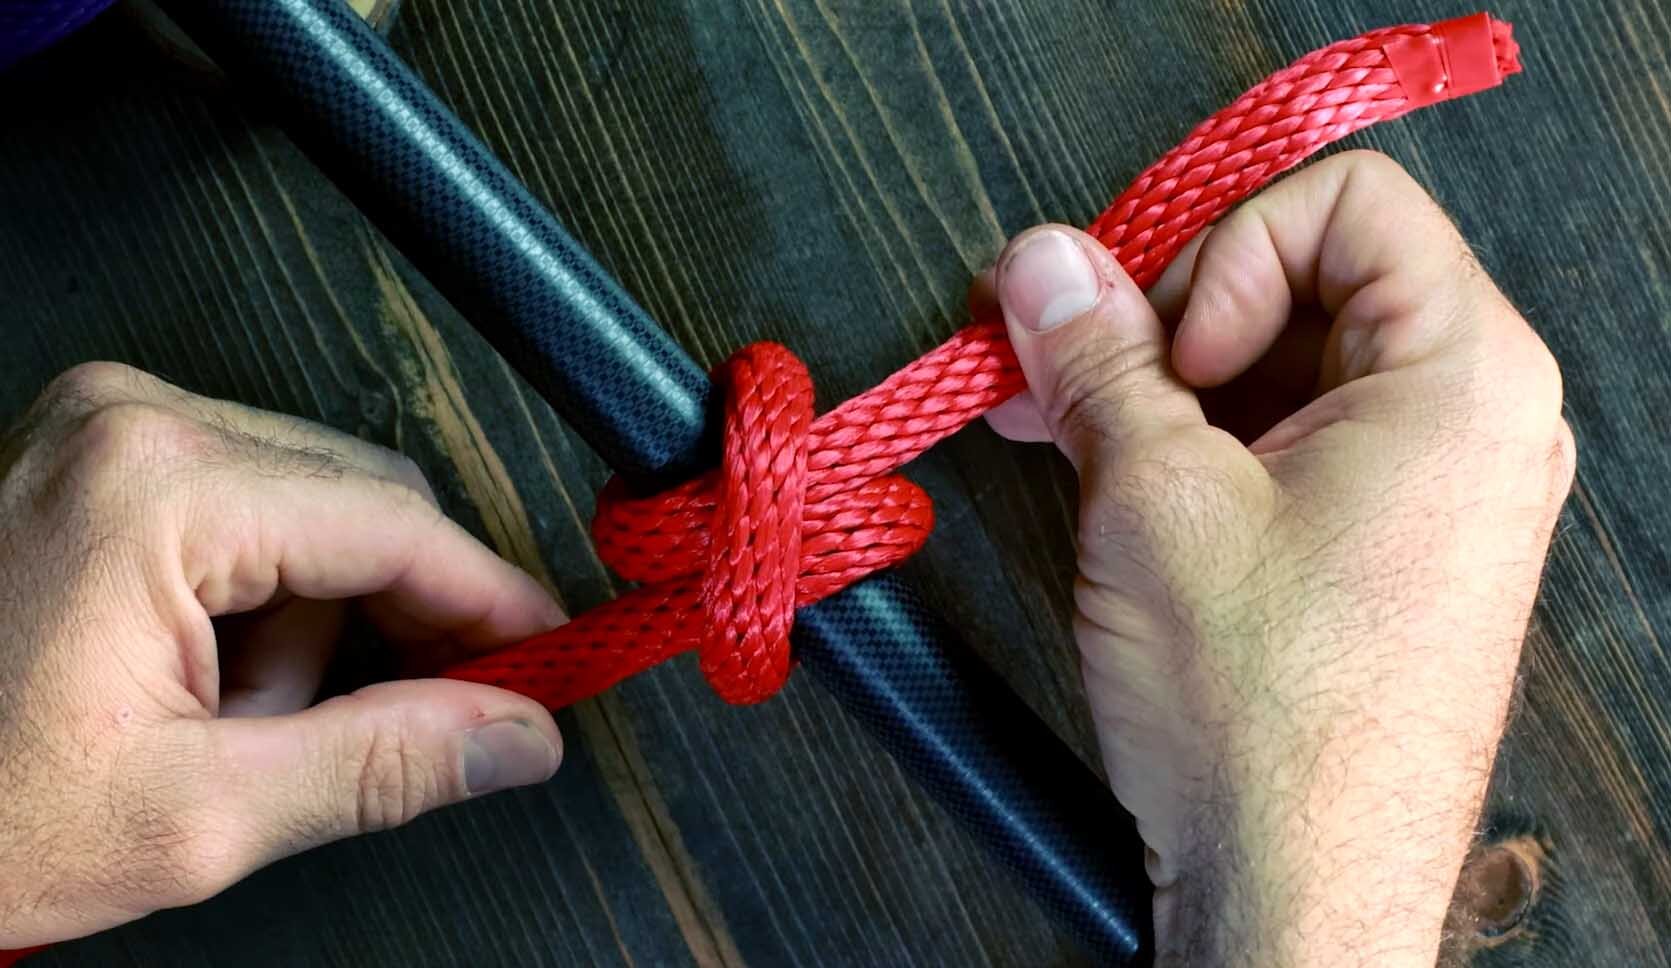 Tying a Clove Hitch Rope End Method using a red rope on a black pole.